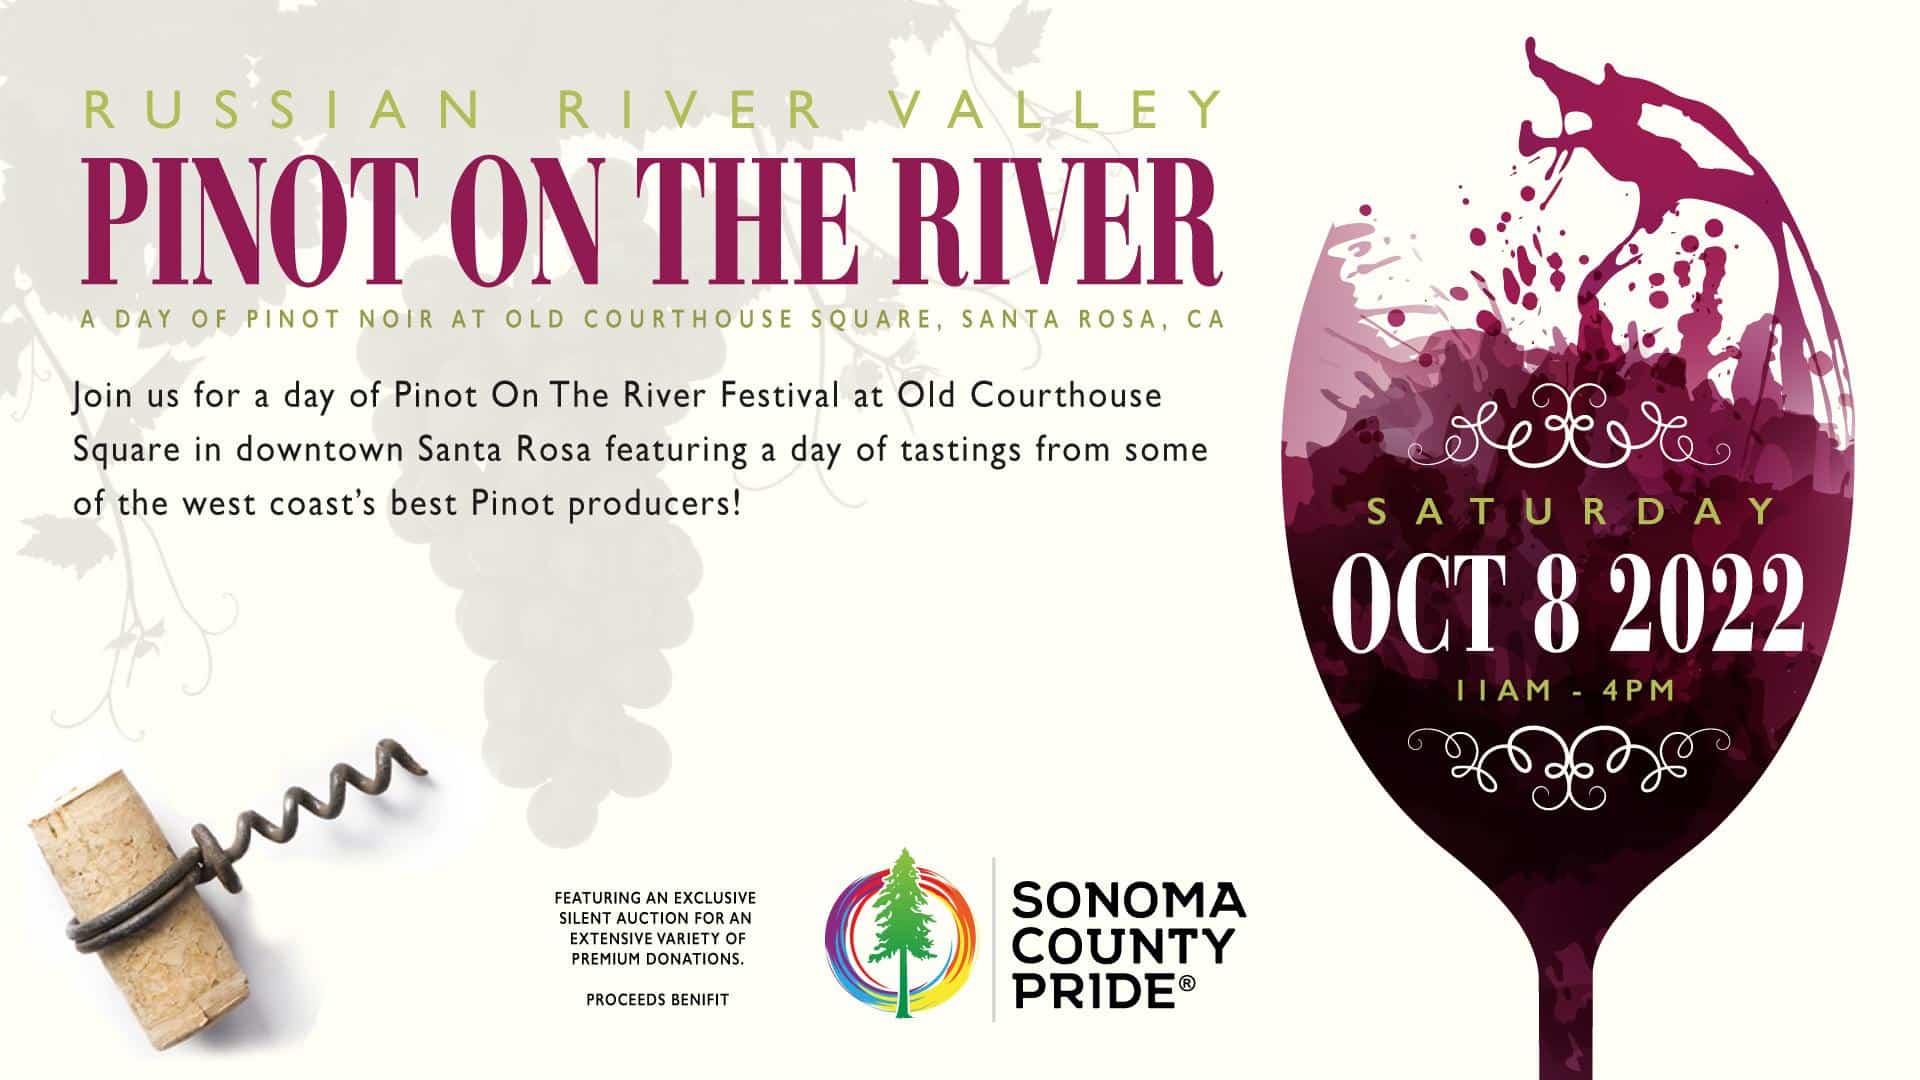 Pinot on the River 2022